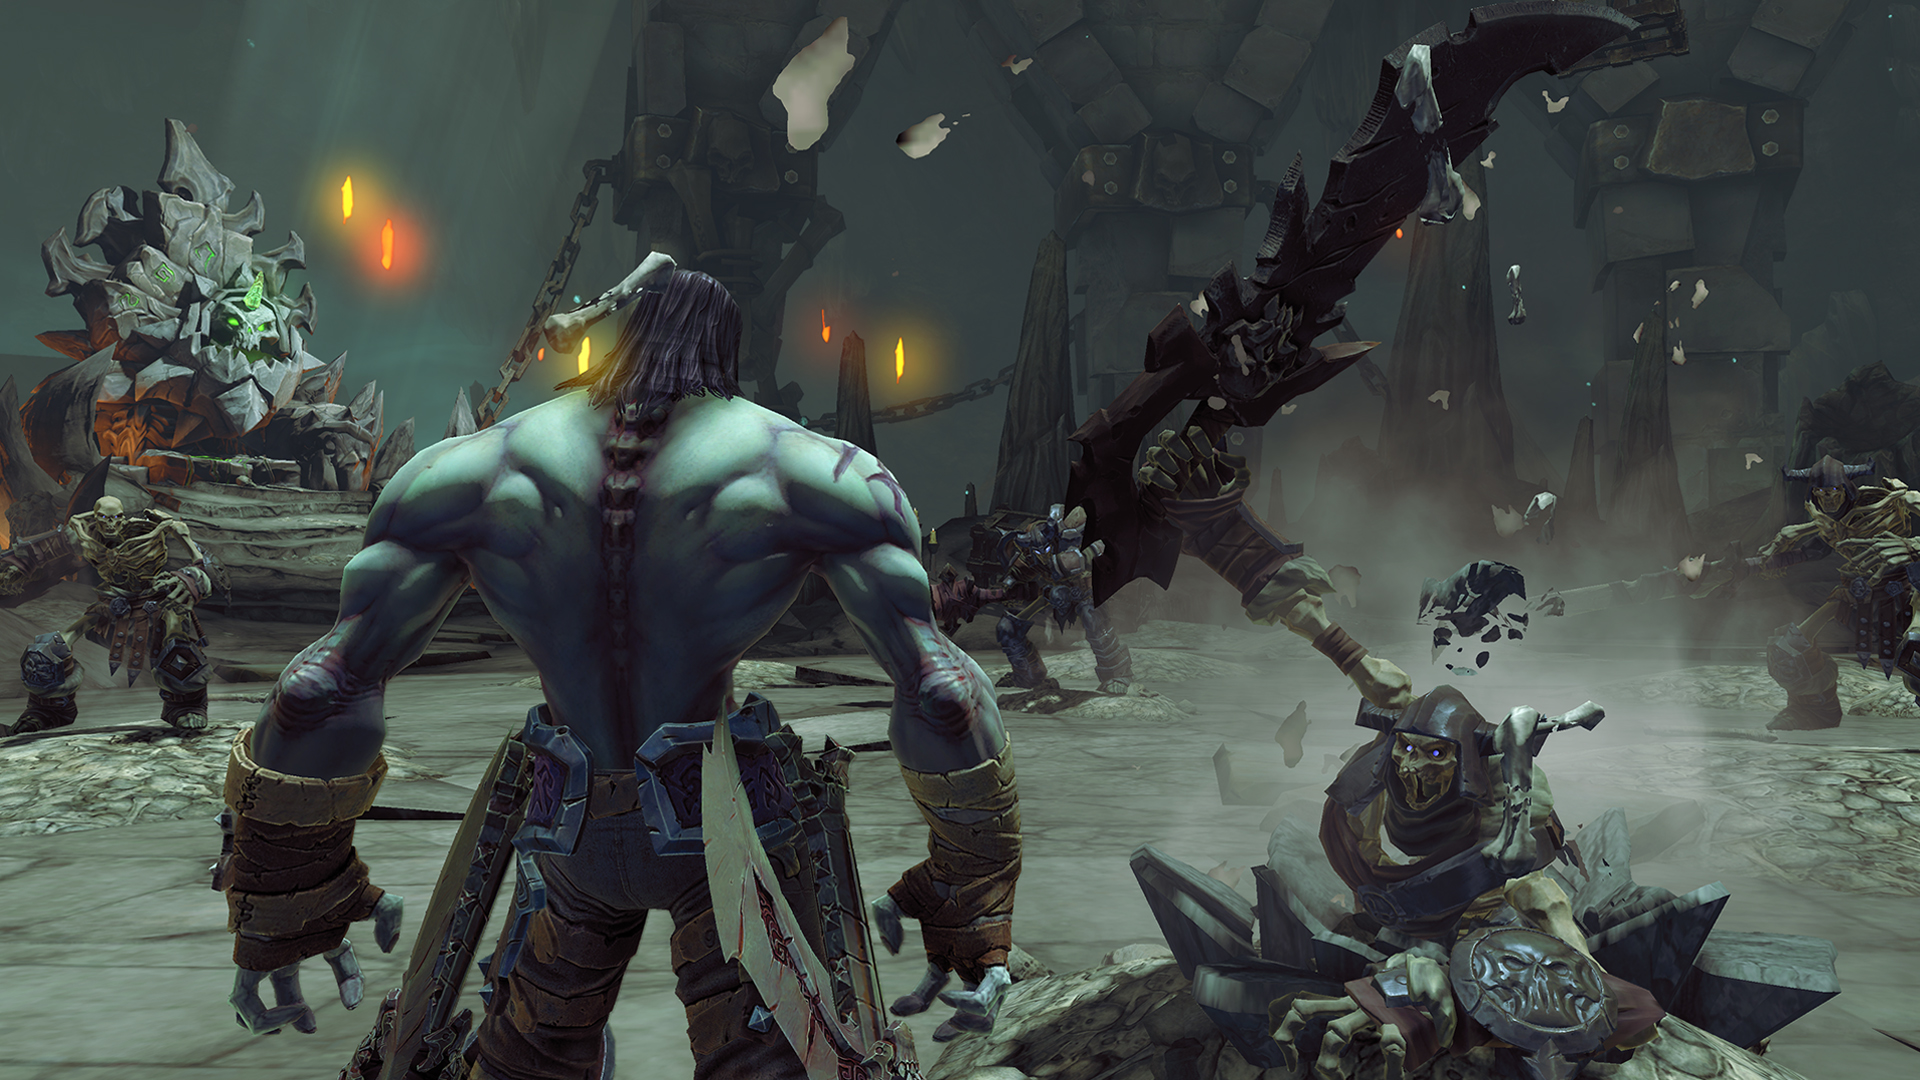 darksiders-ii-deathinitive-edition-download-free-gog-pc-games